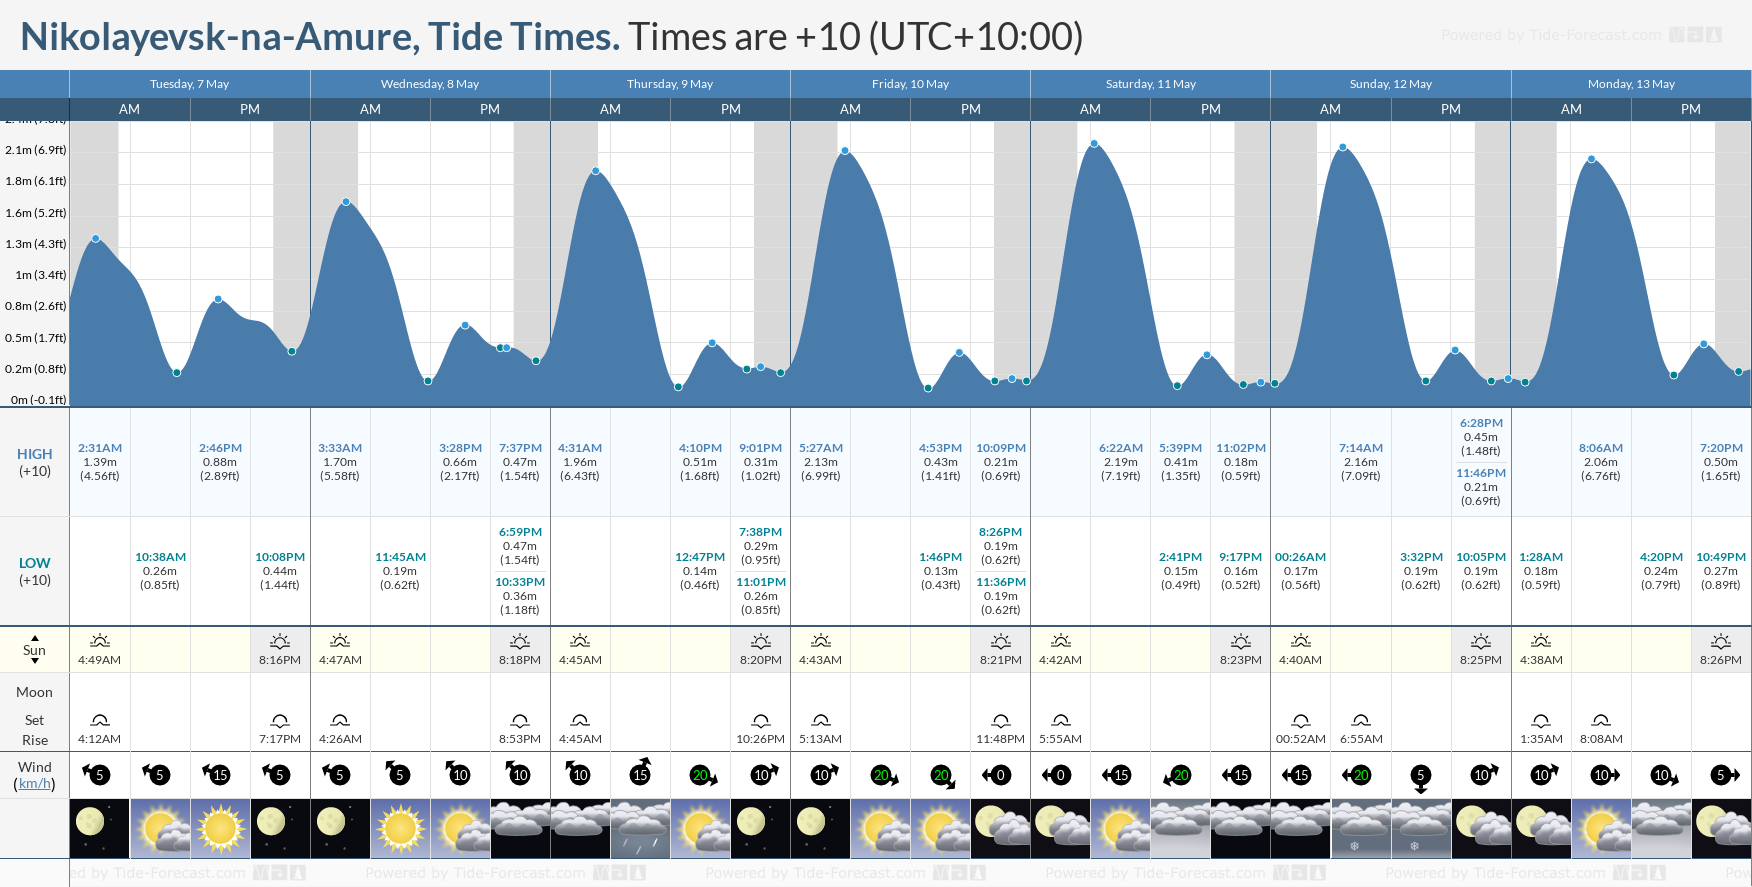 Nikolayevsk-na-Amure Tide Chart including high and low tide tide times for the next 7 days